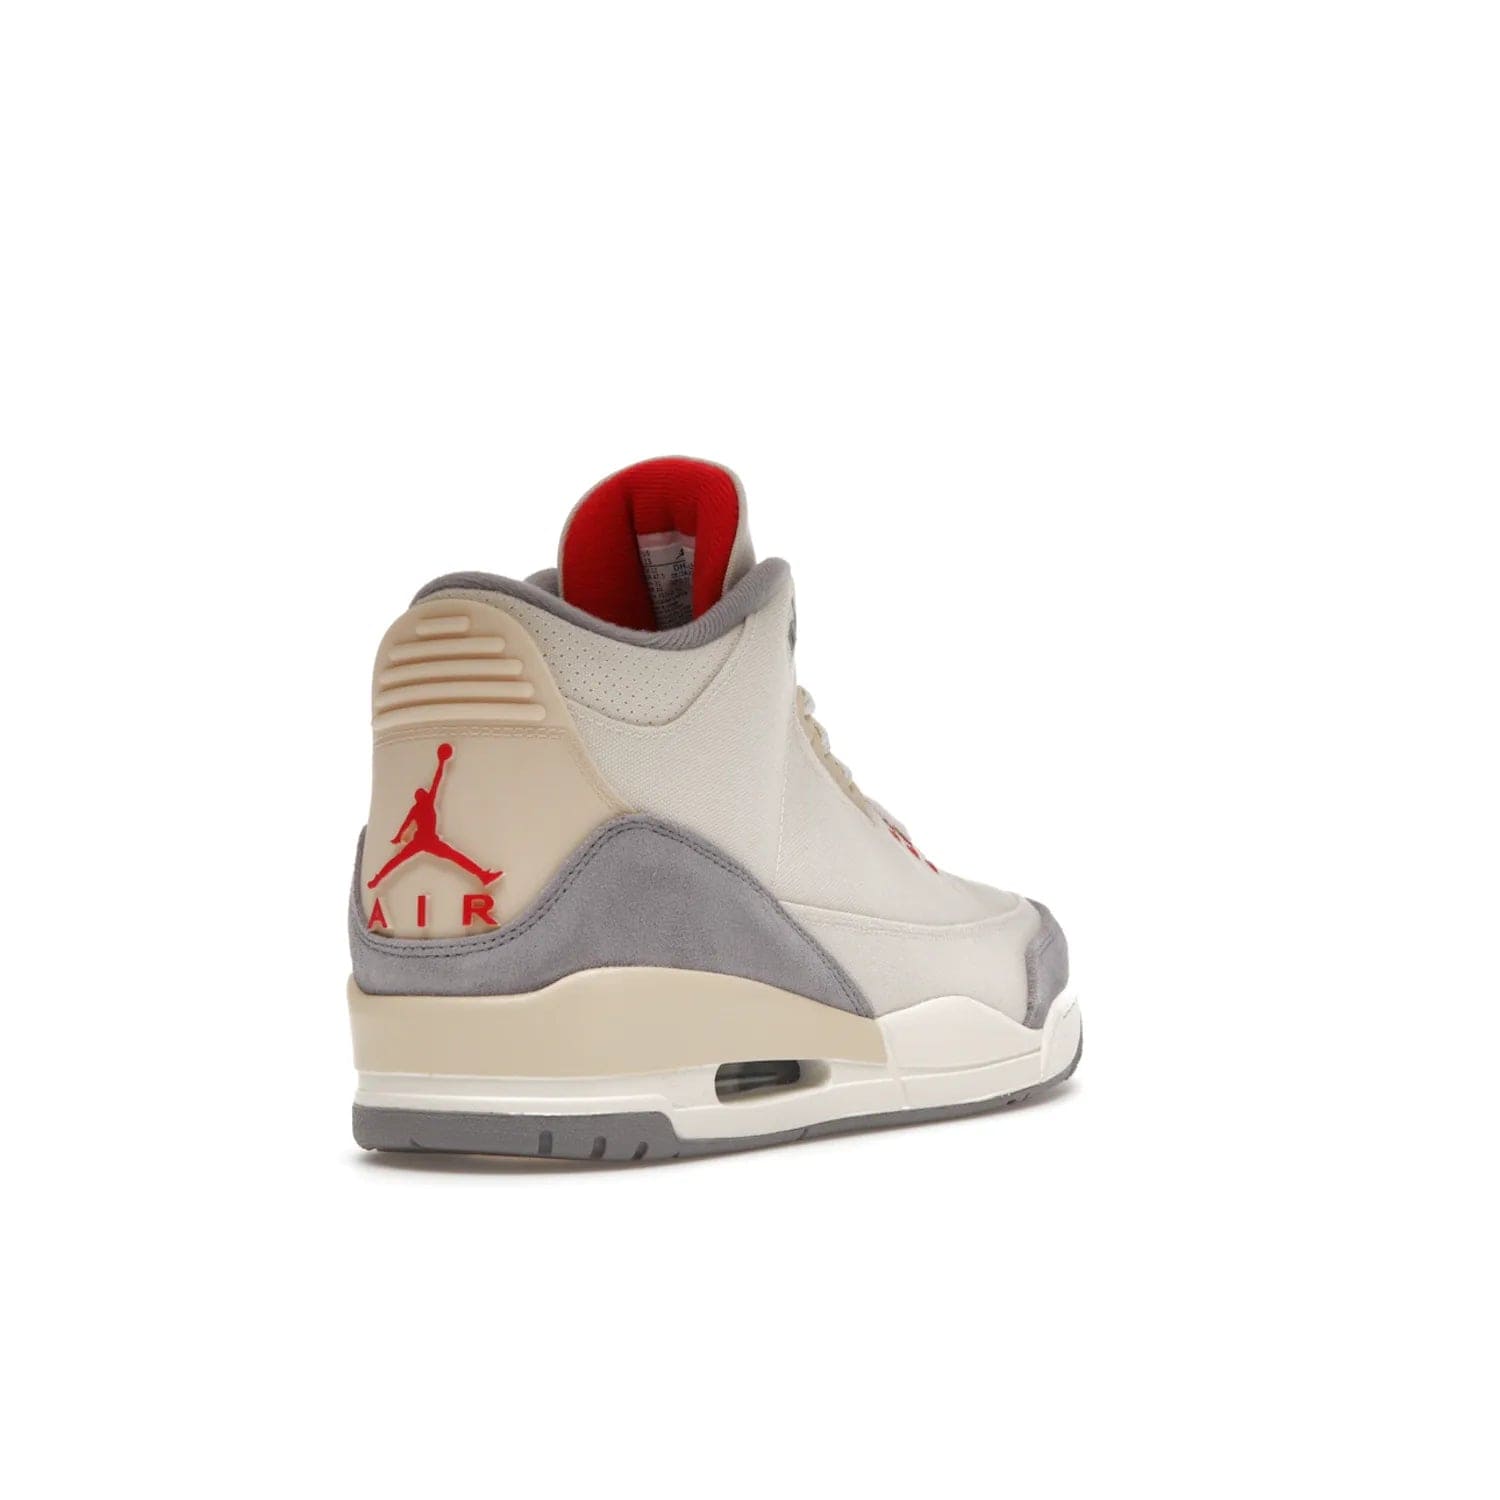 Jordan 3 Retro Muslin - Image 31 - Only at www.BallersClubKickz.com - Eye-catching Air Jordan 3 Retro Muslin in a neutral palette of grey, cream, and red. Featuring canvas upper, suede overlays and white/grey Air Max sole. Available in March 2022.